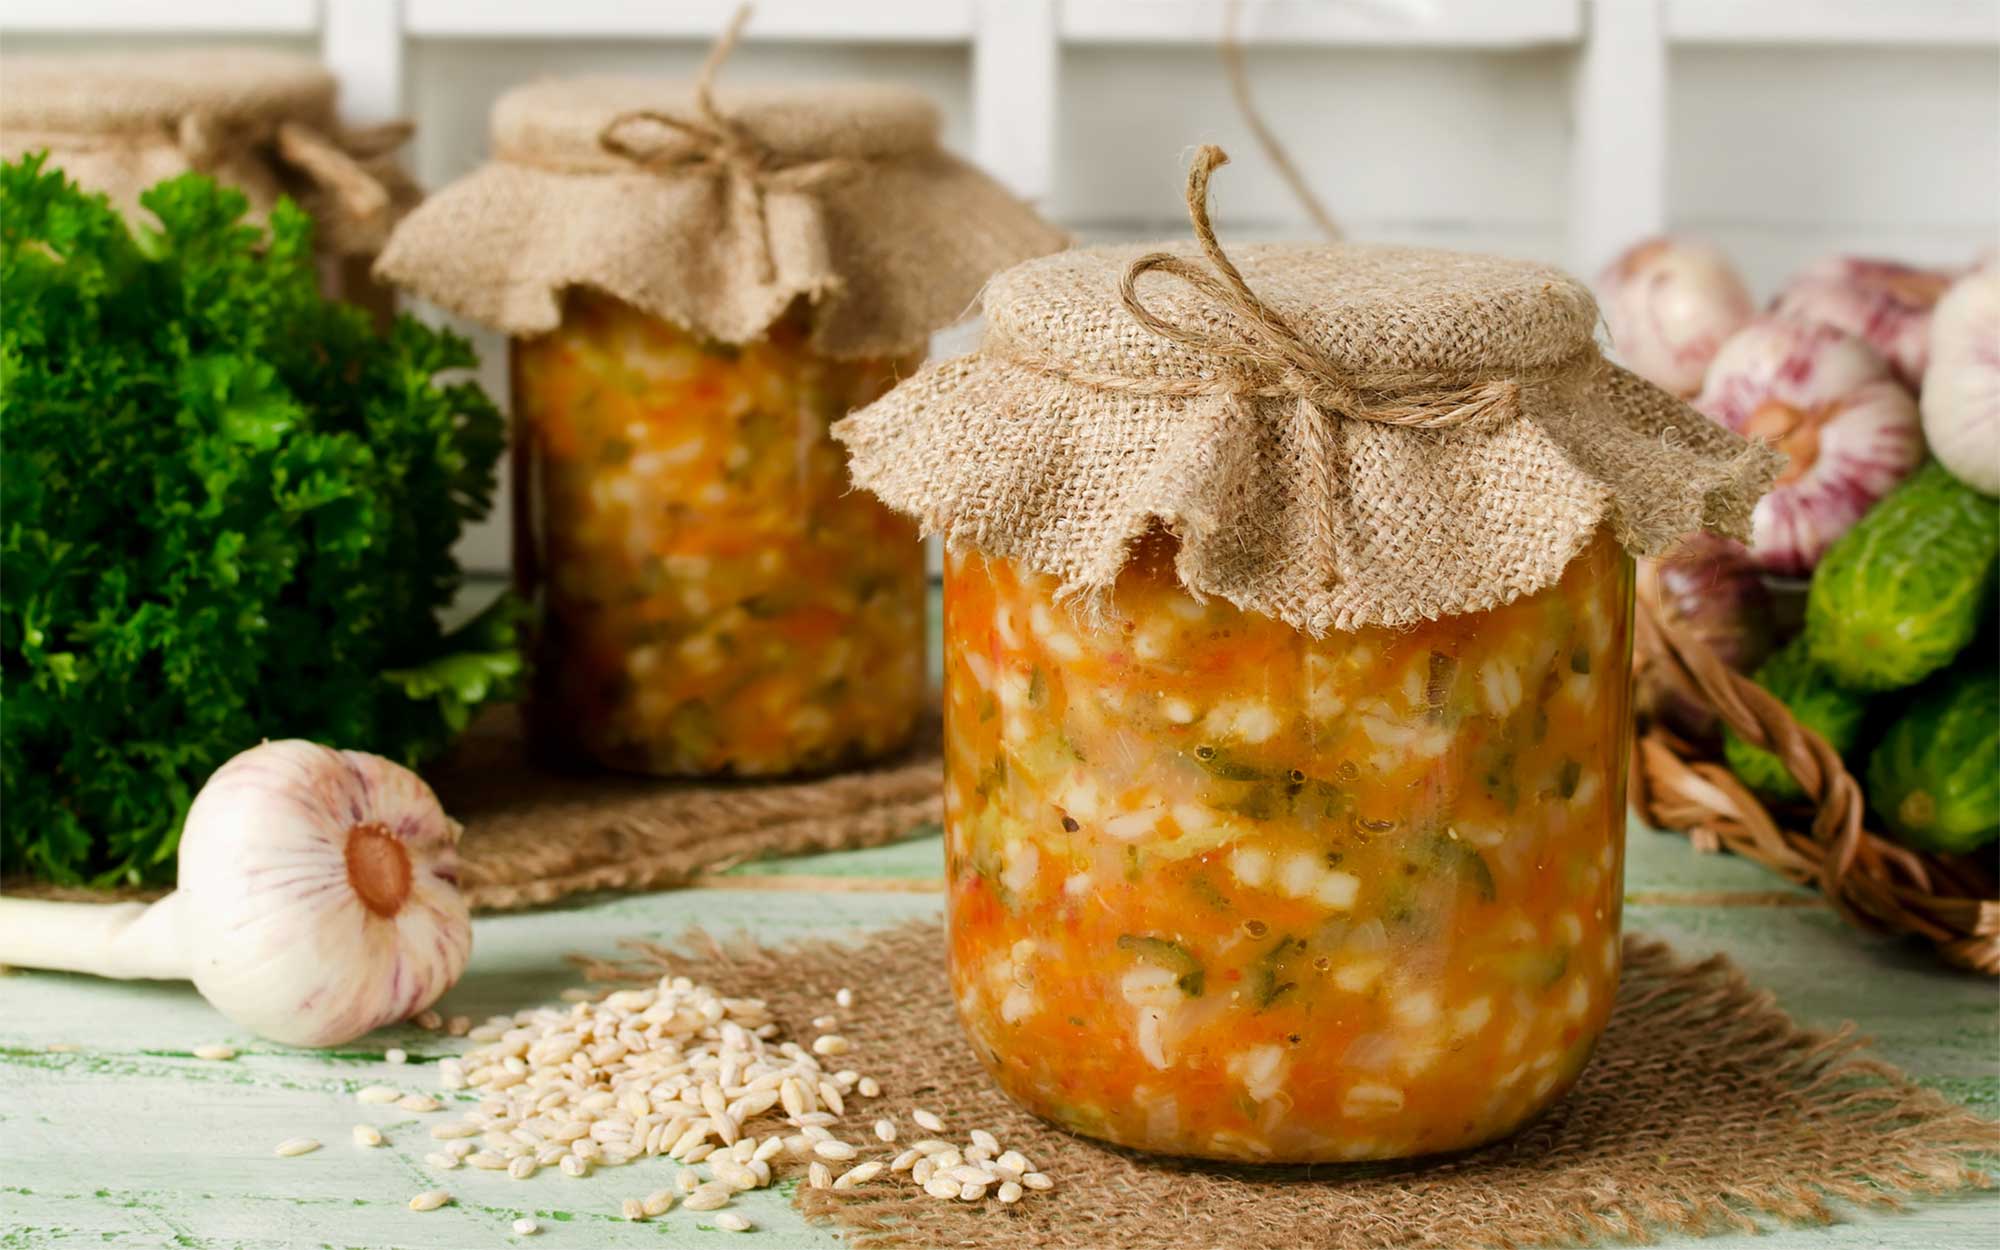 Pressure Canning Soup Recipes That Are Better Than Store-Bought